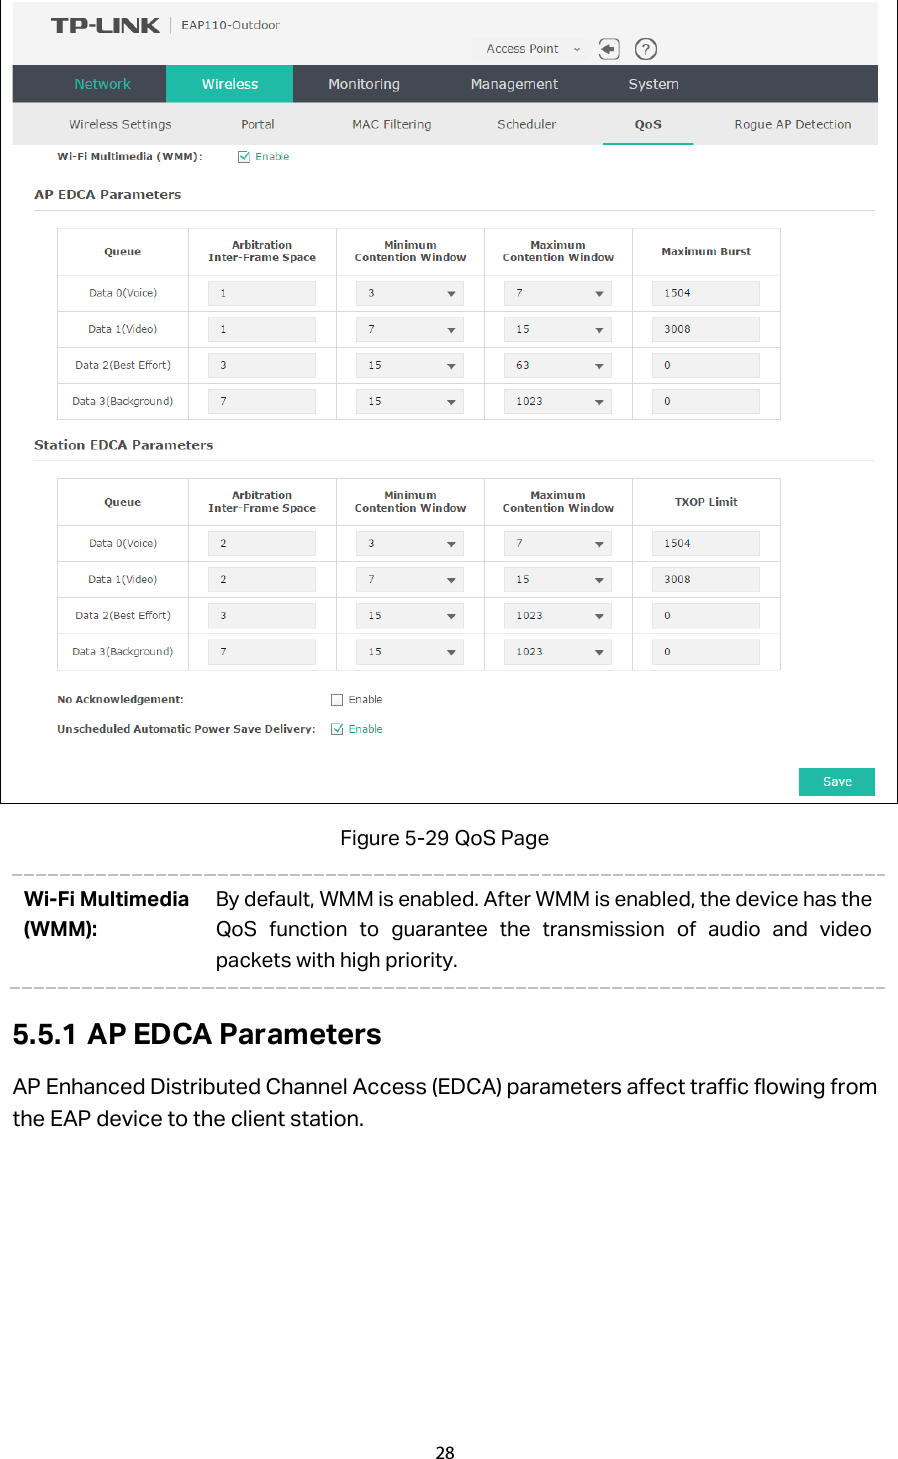  Figure 5-29 QoS Page Wi-Fi Multimedia (WMM): By default, WMM is enabled. After WMM is enabled, the device has the QoS function to guarantee the transmission of audio and video packets with high priority. 5.5.1 AP EDCA Parameters AP Enhanced Distributed Channel Access (EDCA) parameters affect traffic flowing from the EAP device to the client station. 28  